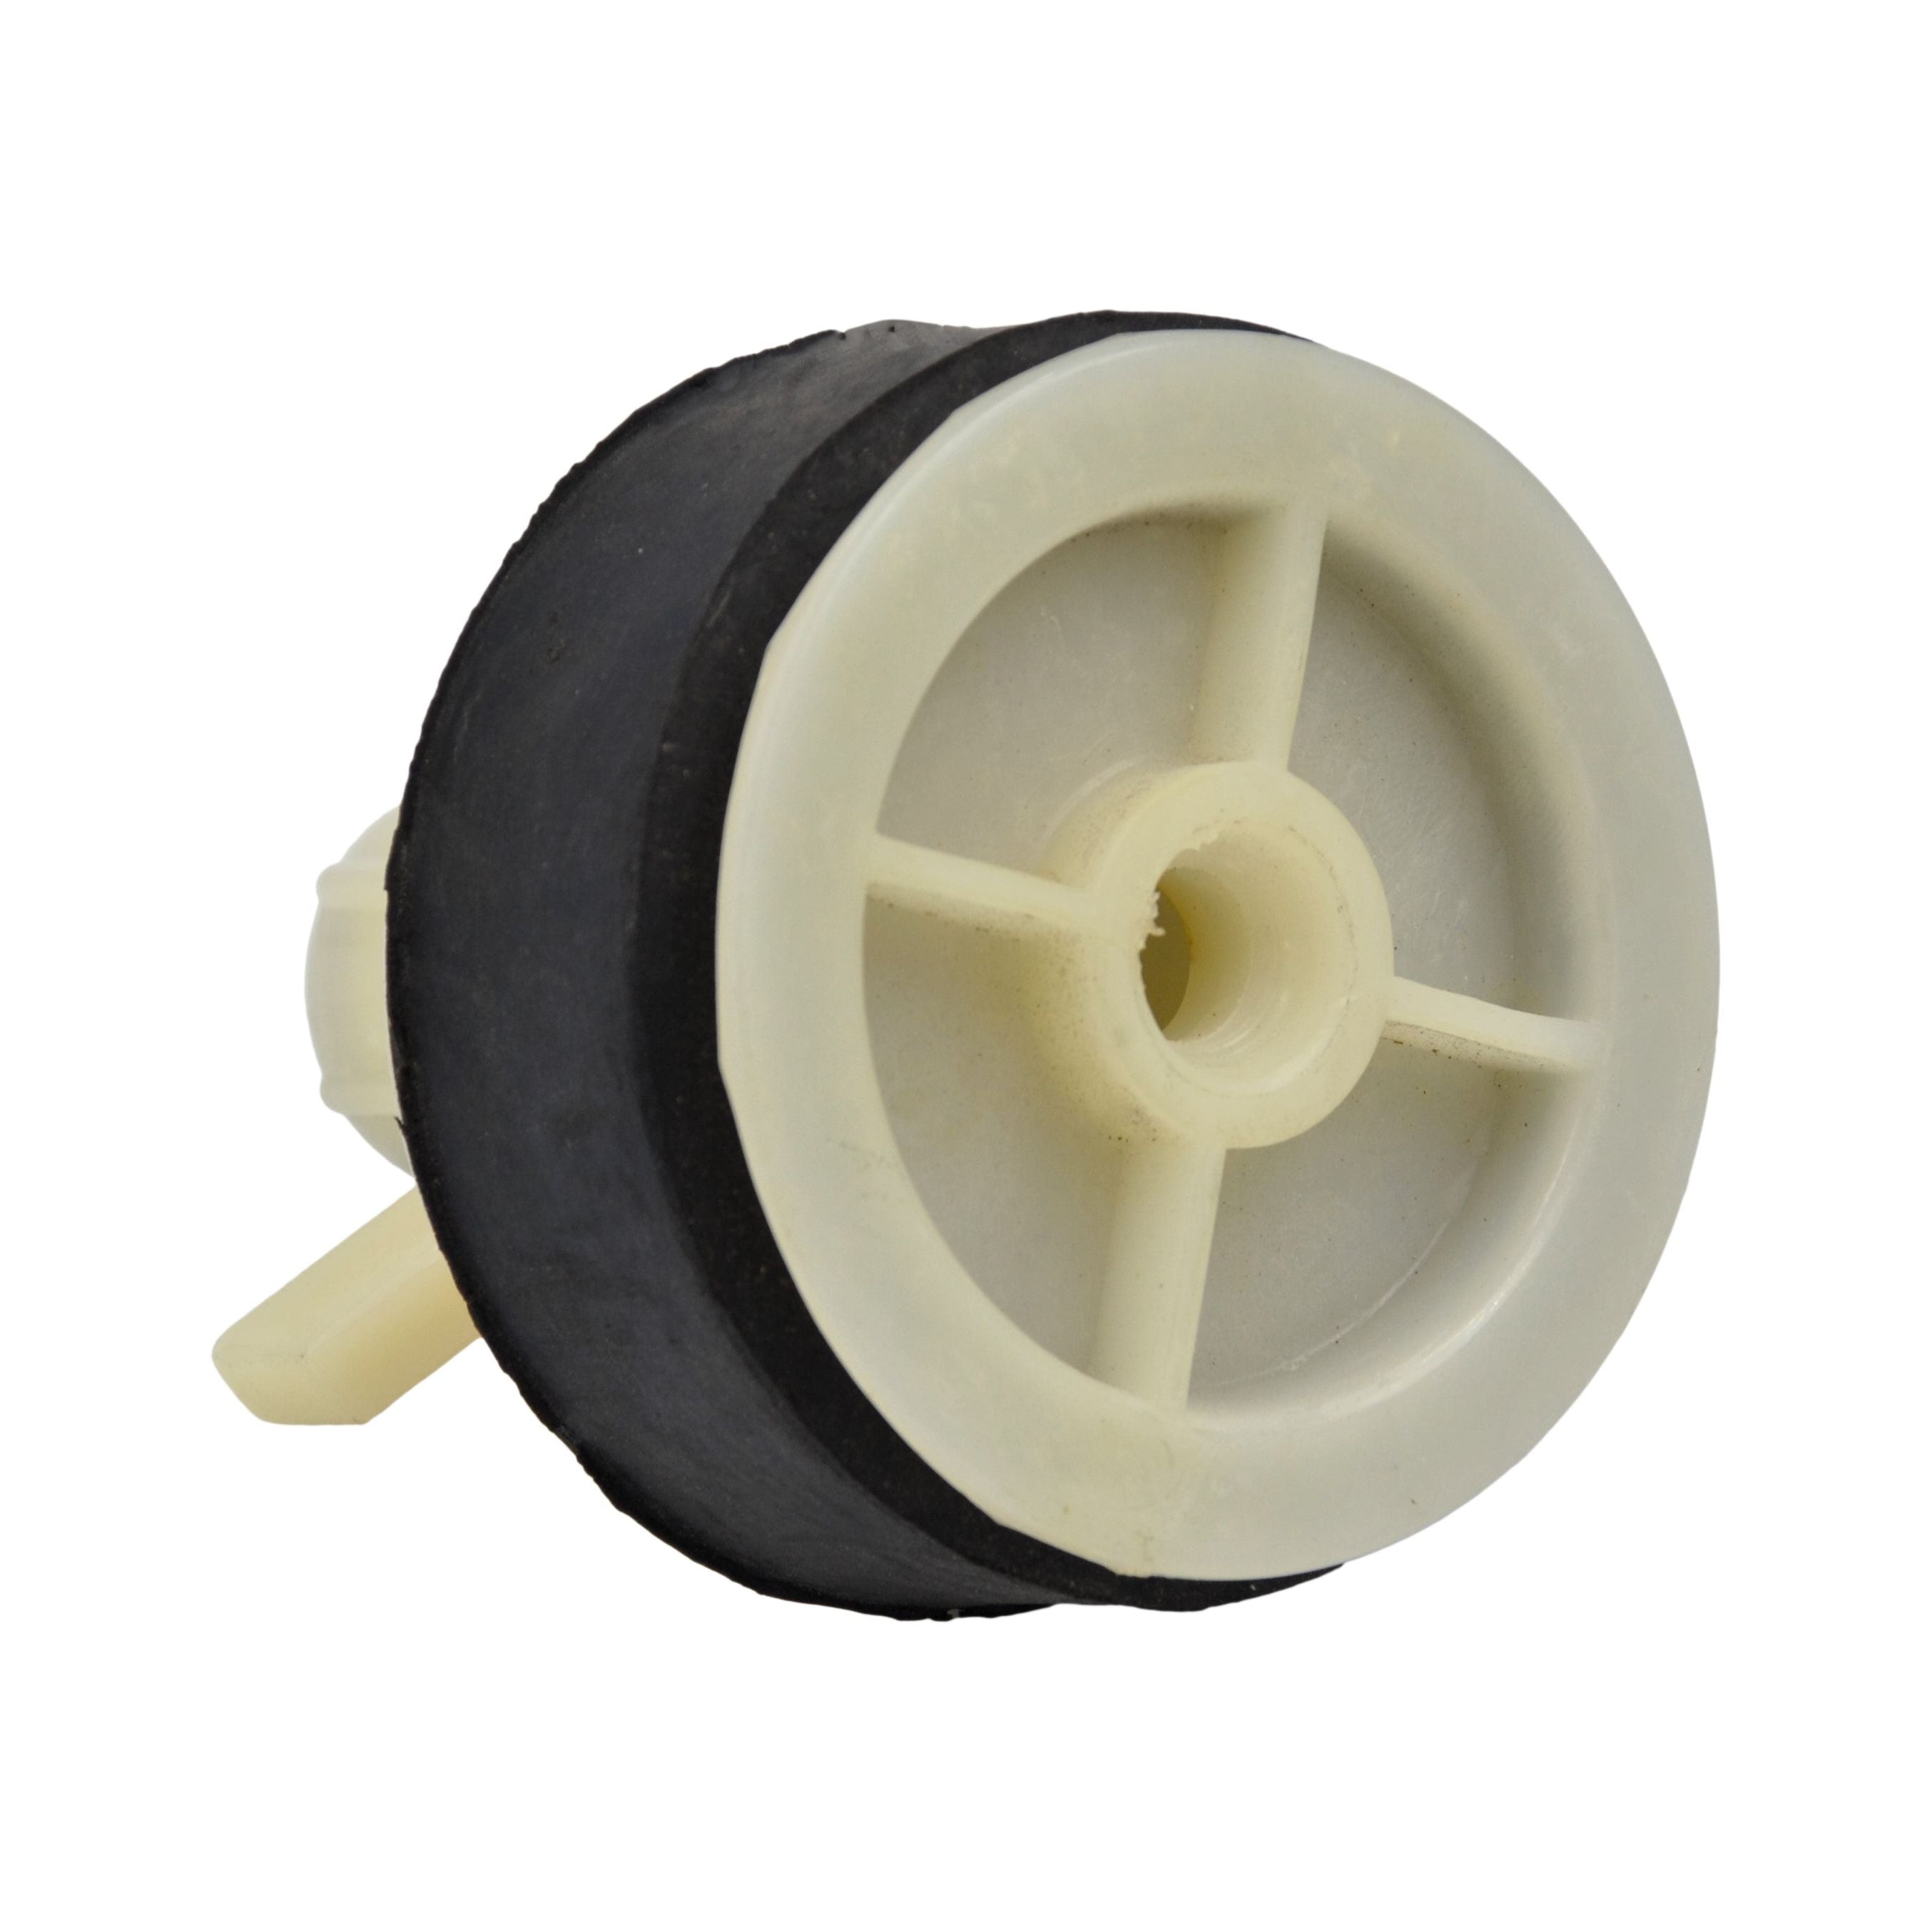 Nylon Mechanical Pipe Test plug bung with 13mm bypass 73mm to 88mm